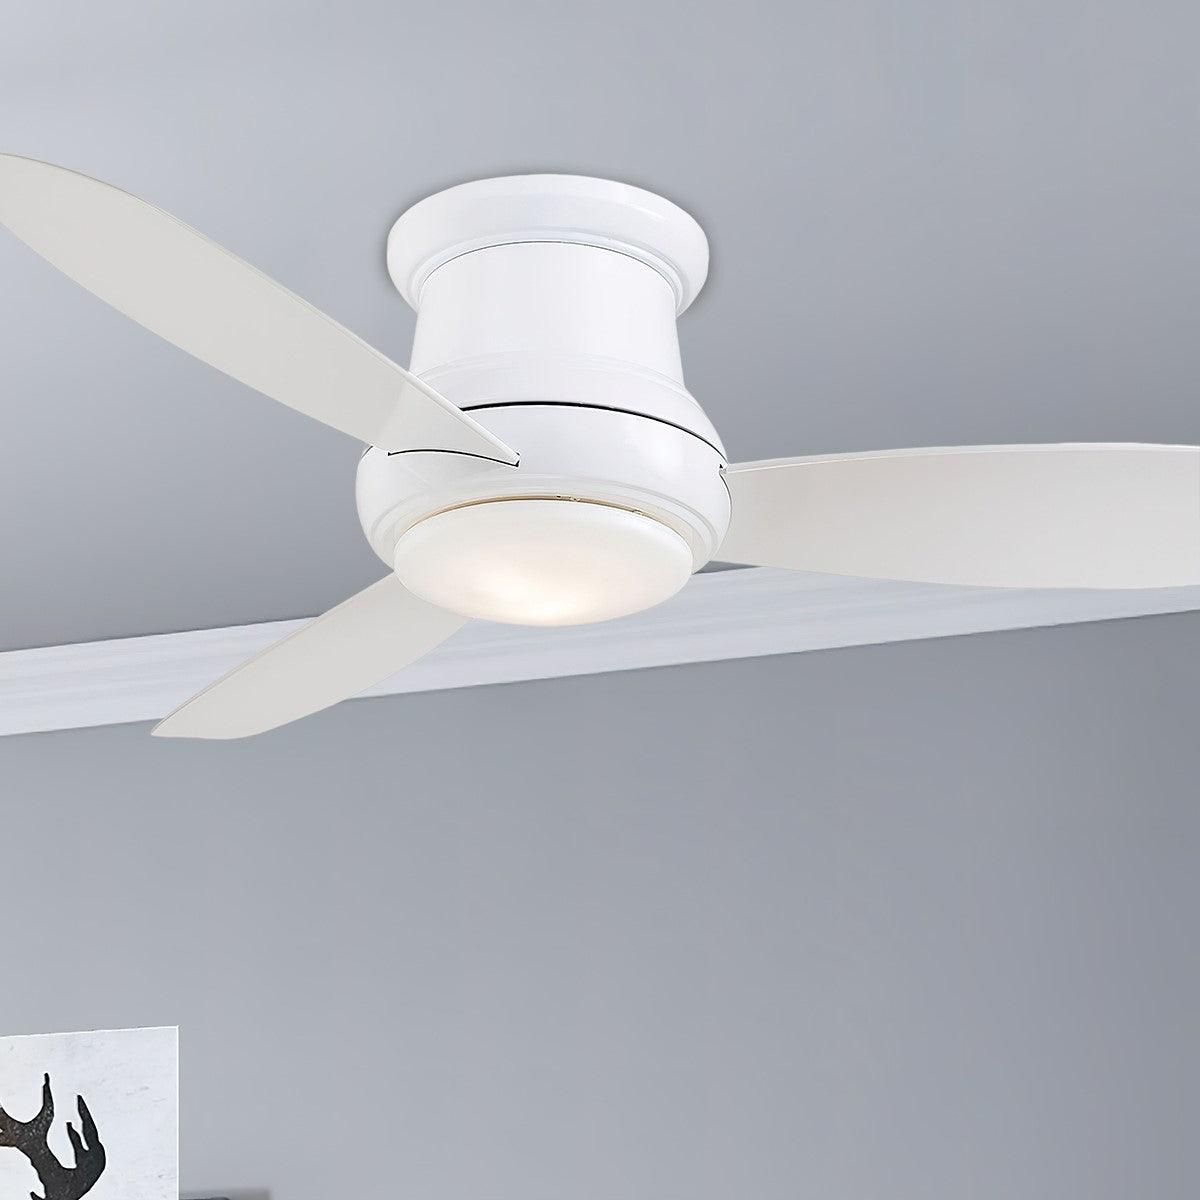 Concept II 44 Inch Modern Ceiling Fan With Light And Remote - Bees Lighting